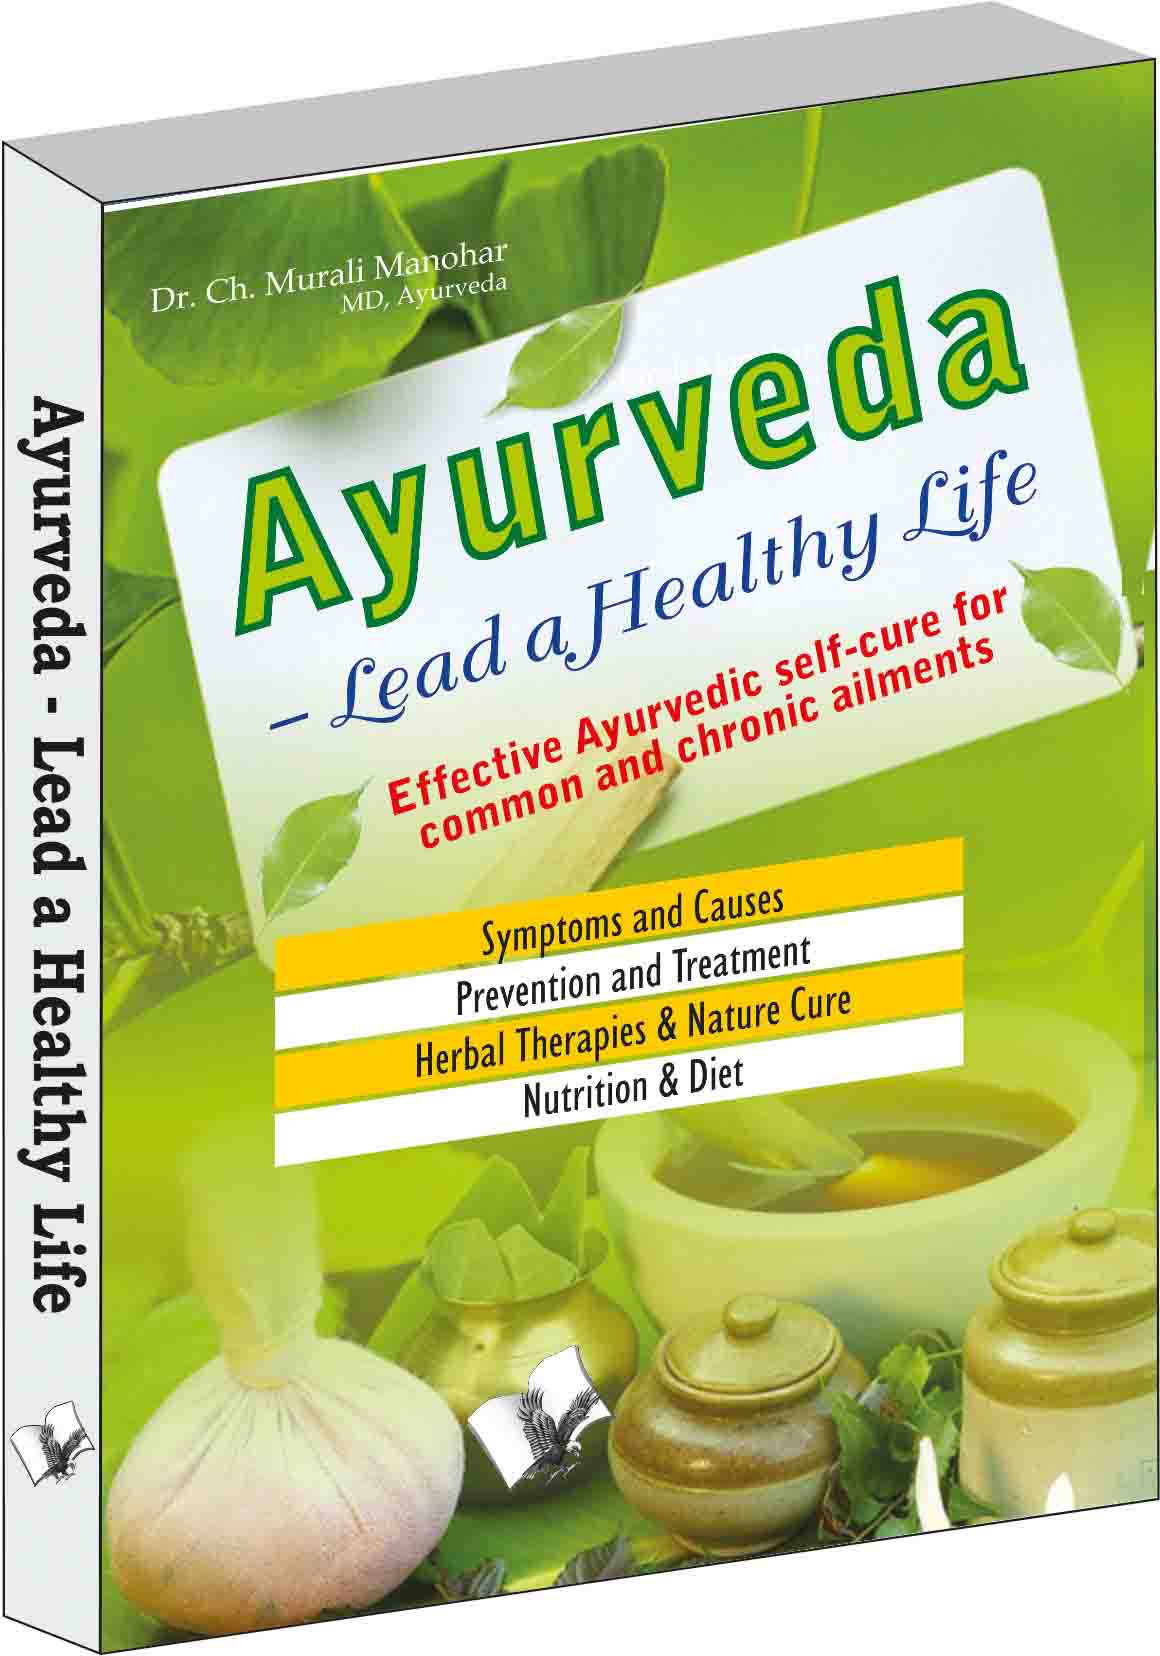 ayurveda-lead-a-healthy-life-effective-ayurvedic-self-cure-forcommon-and-chronic-ailments